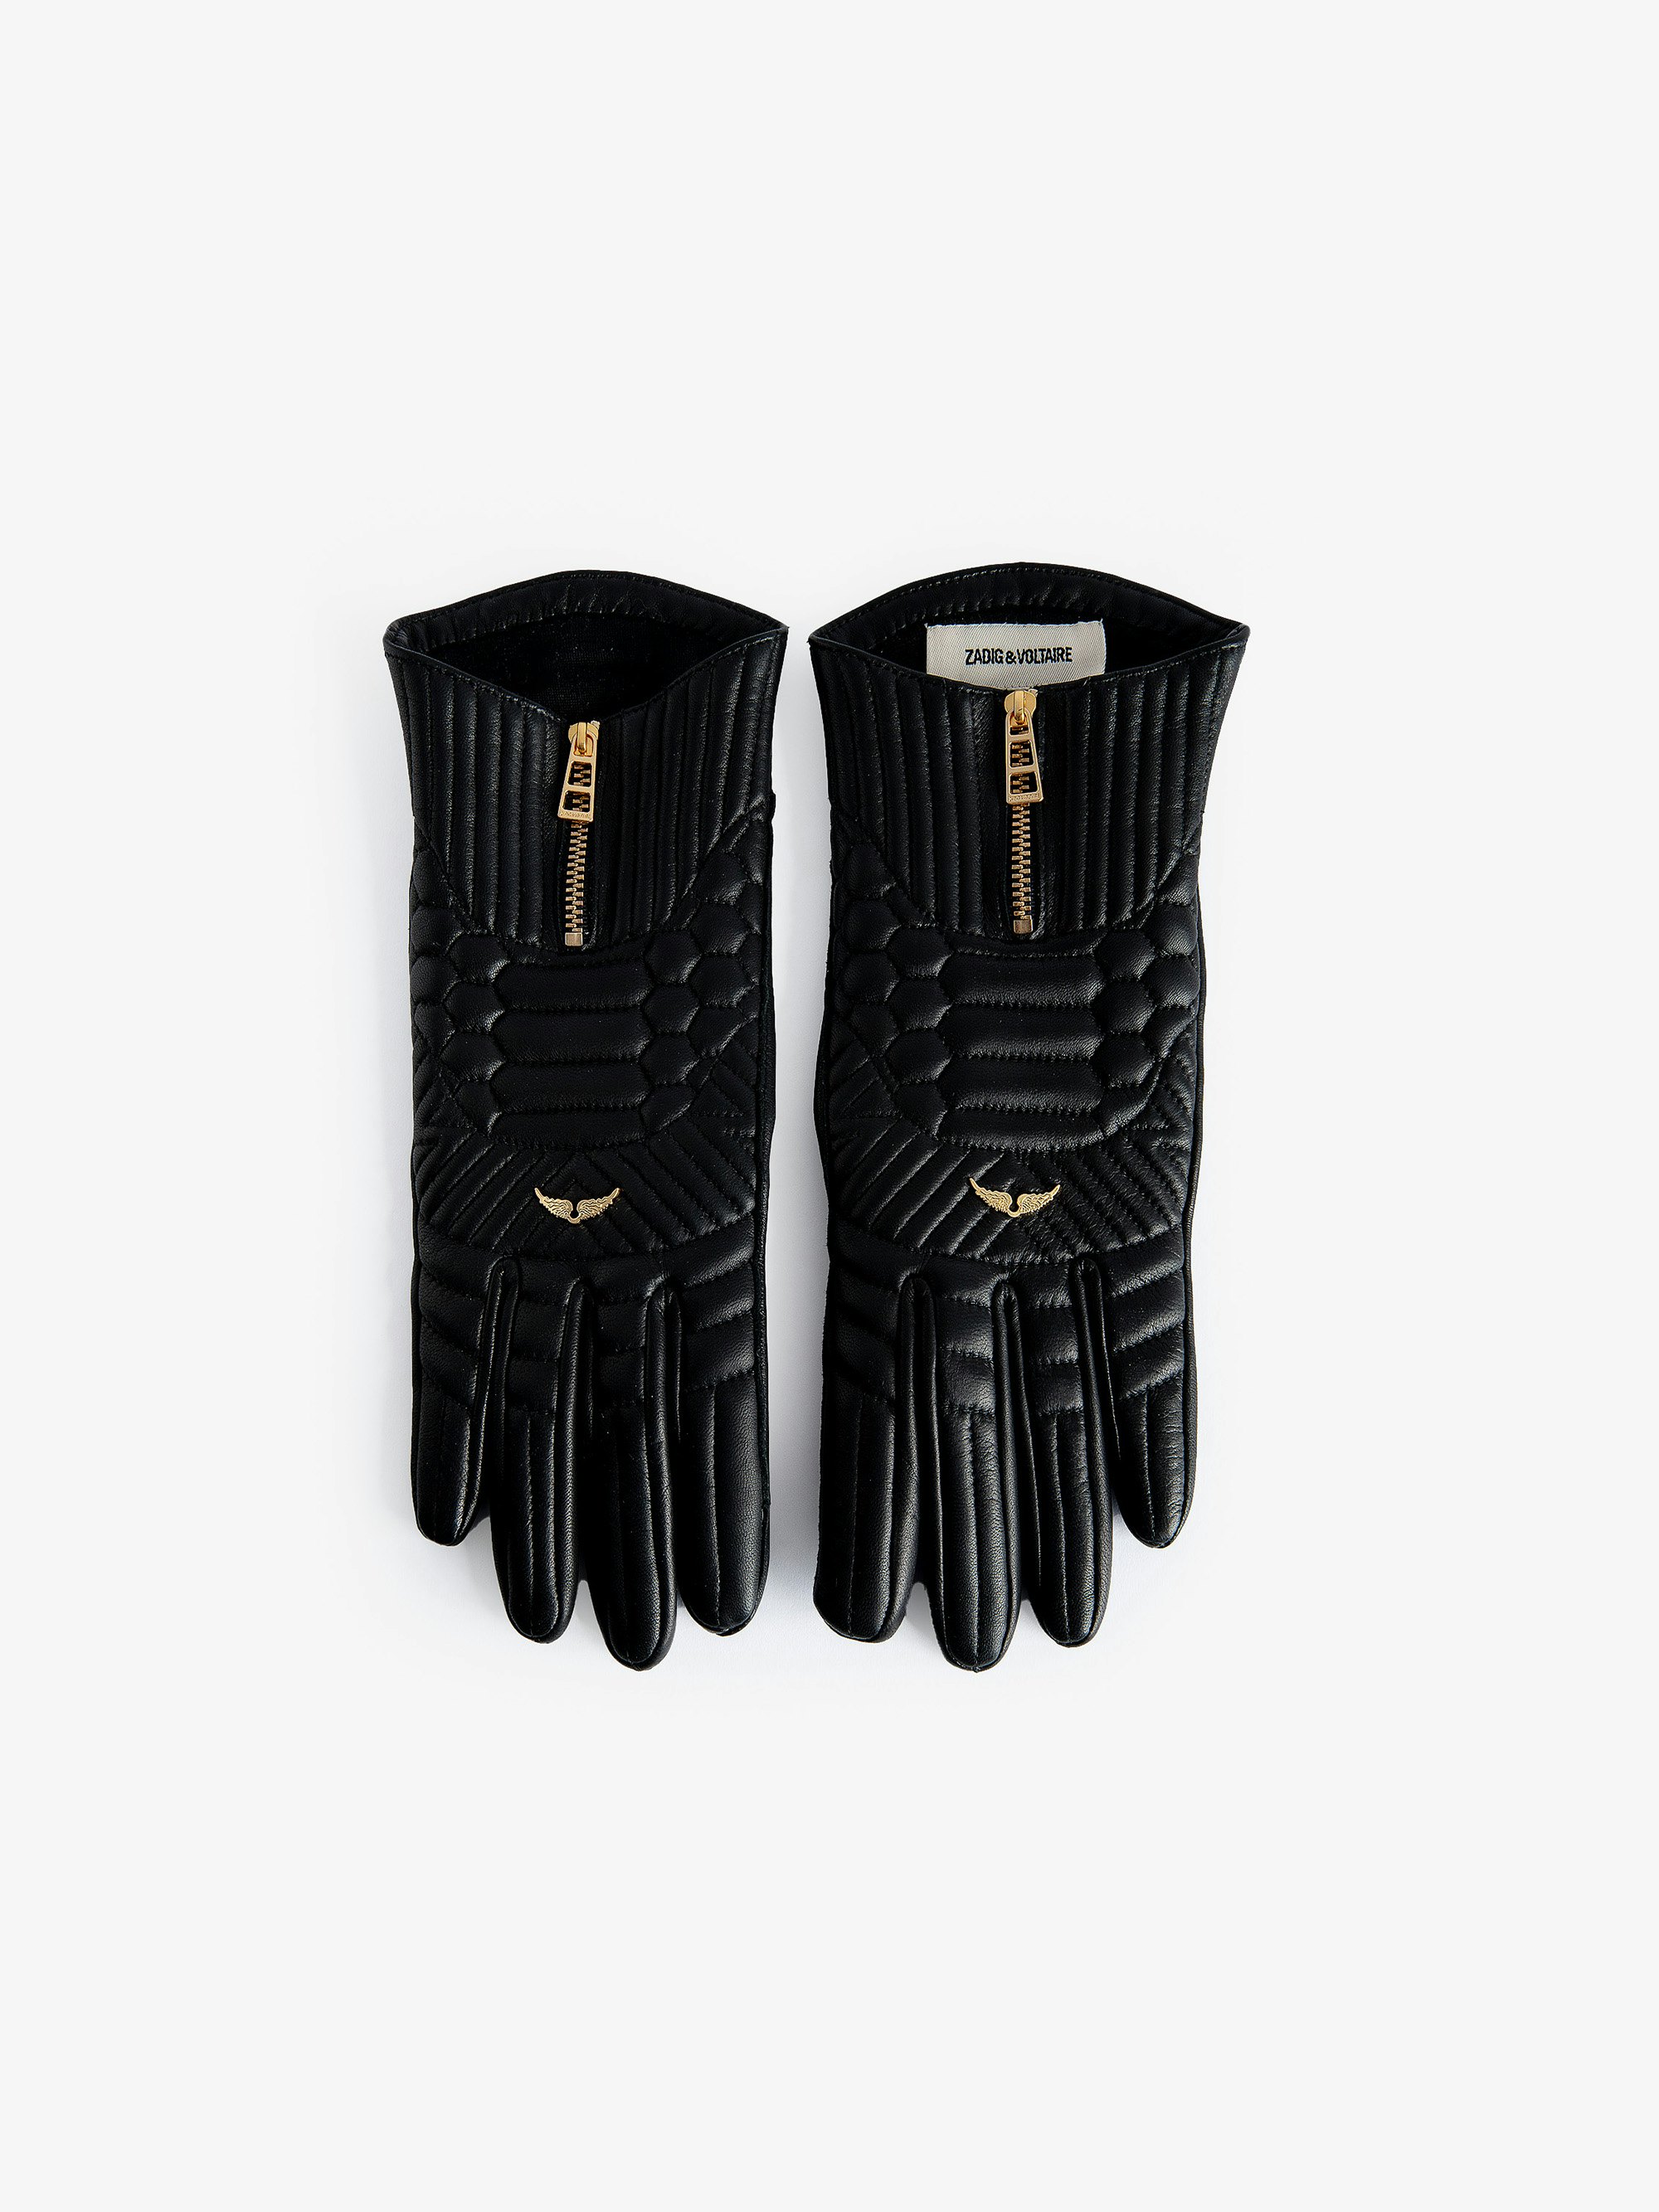 Out of Hands Gloves - Voltaire Vice black smooth and quilted leather gloves with zip fastening and wings charm.